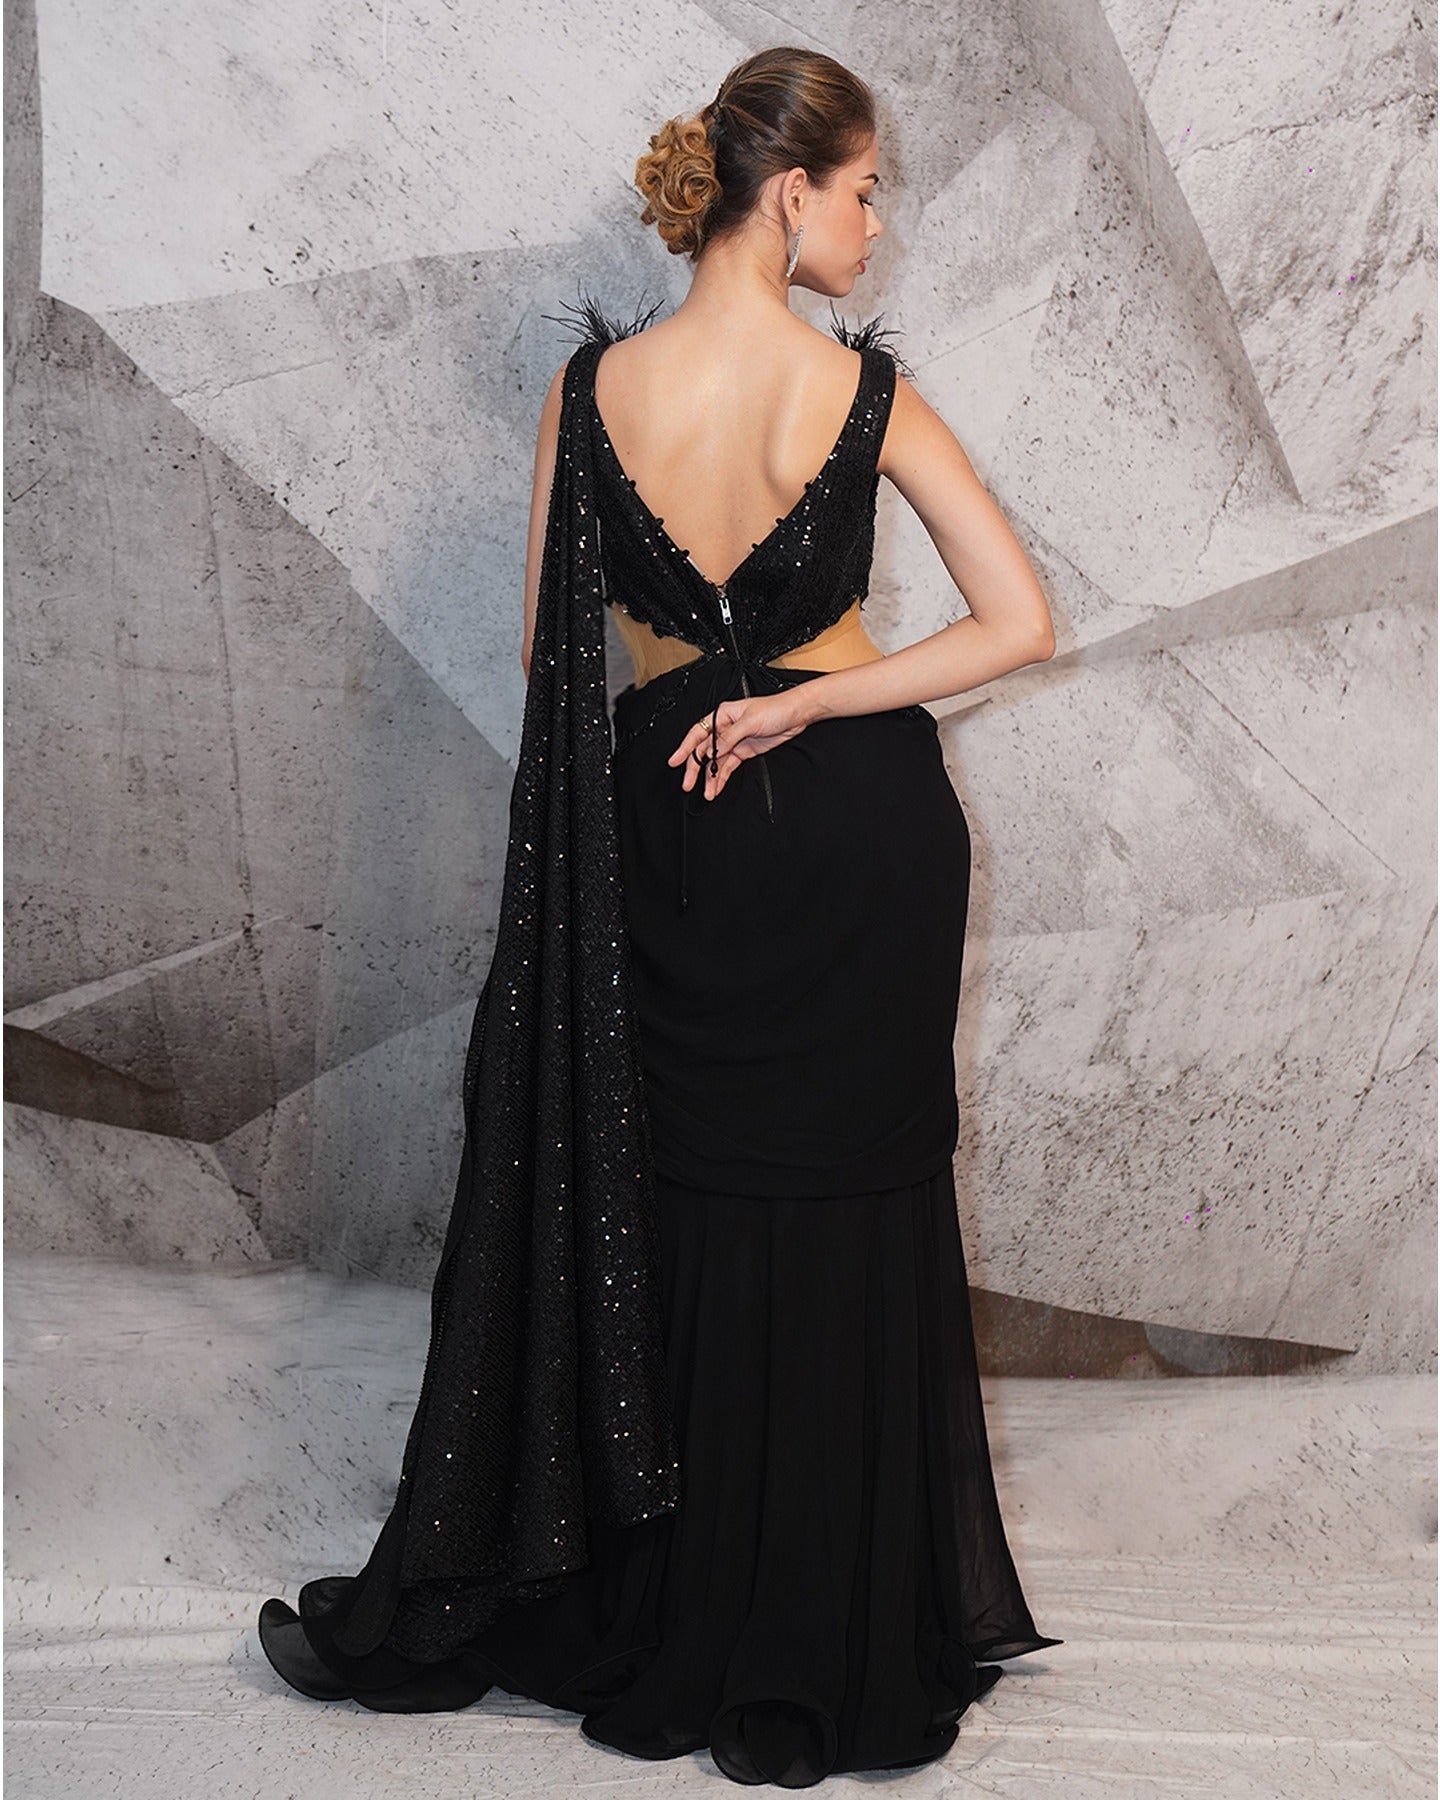 Draped in the mystique of midnight black, this gown is a symphony of sequins, feathers, and intricate embroidery.